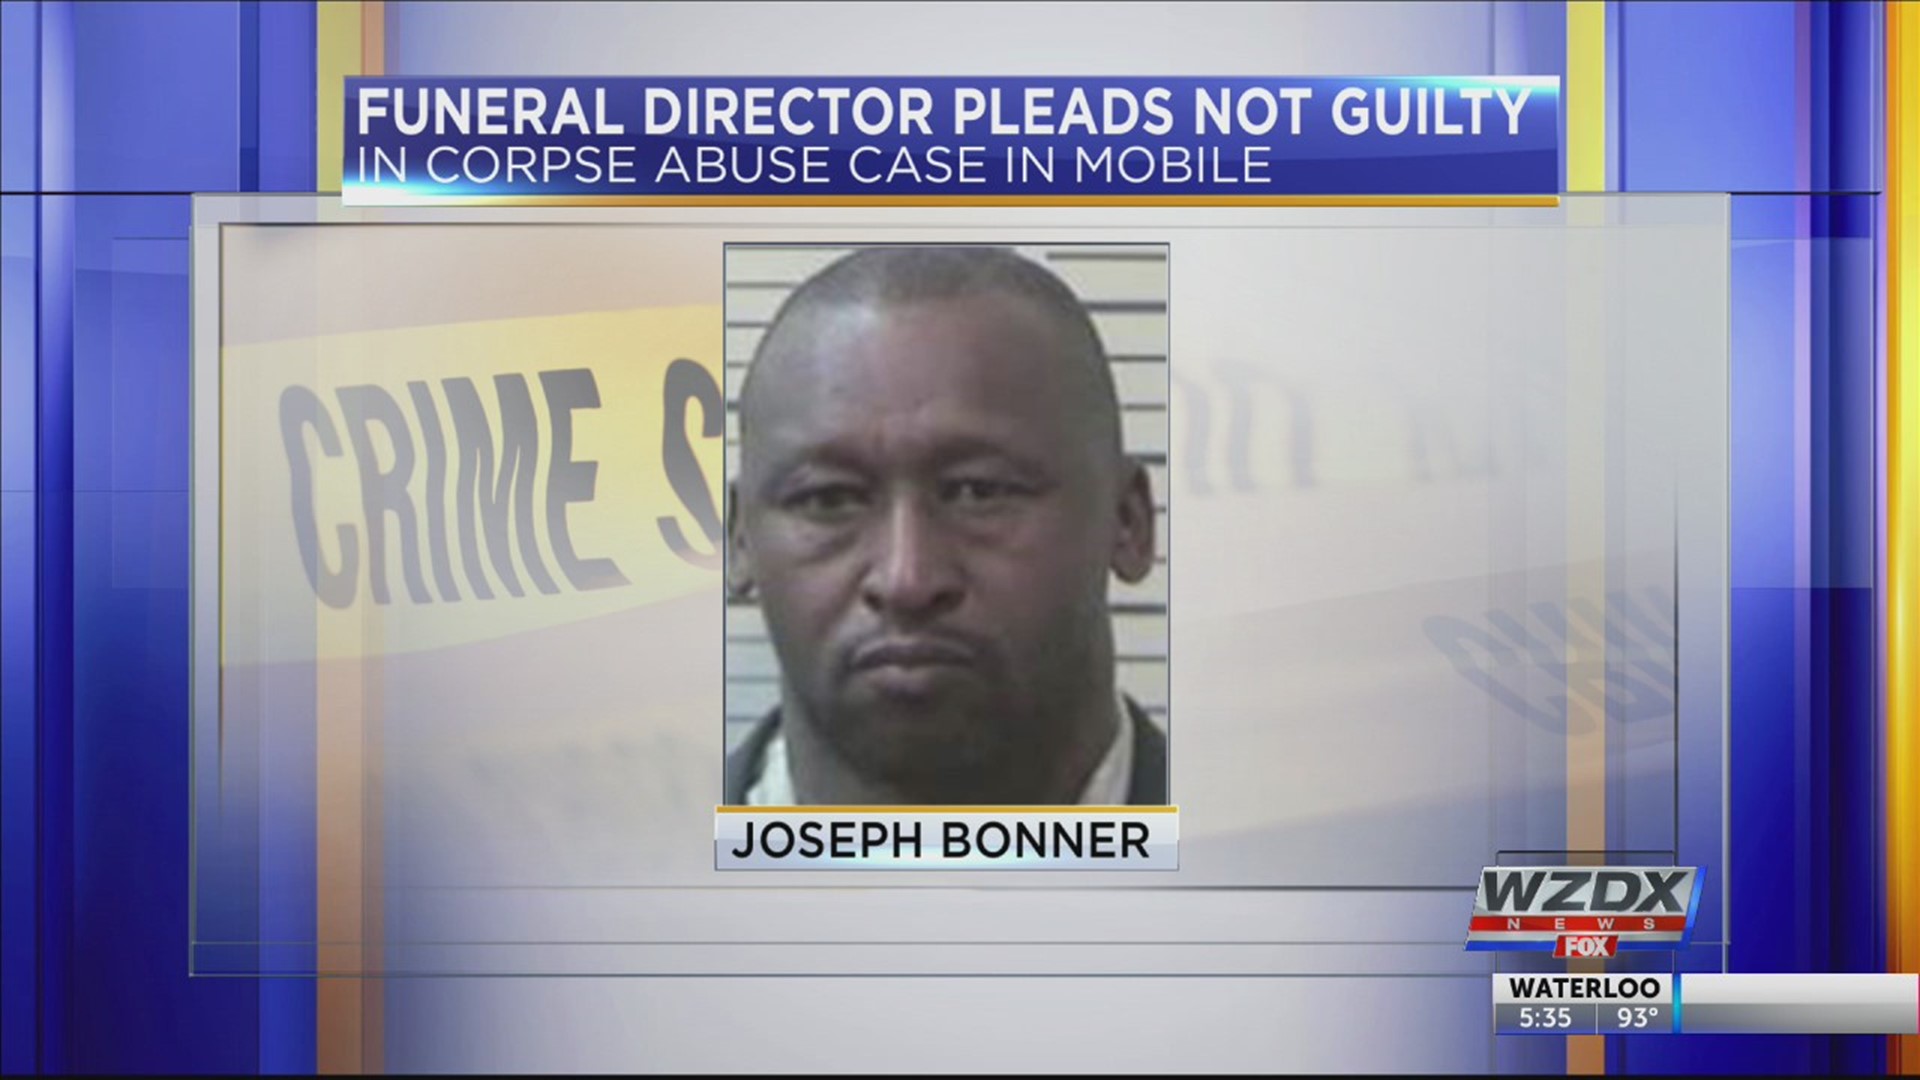 Joseph Bonner was arrested last month after deputies from the Mobile County Sheriff's Office exhumed three bodies at a cemetery in Prichard.